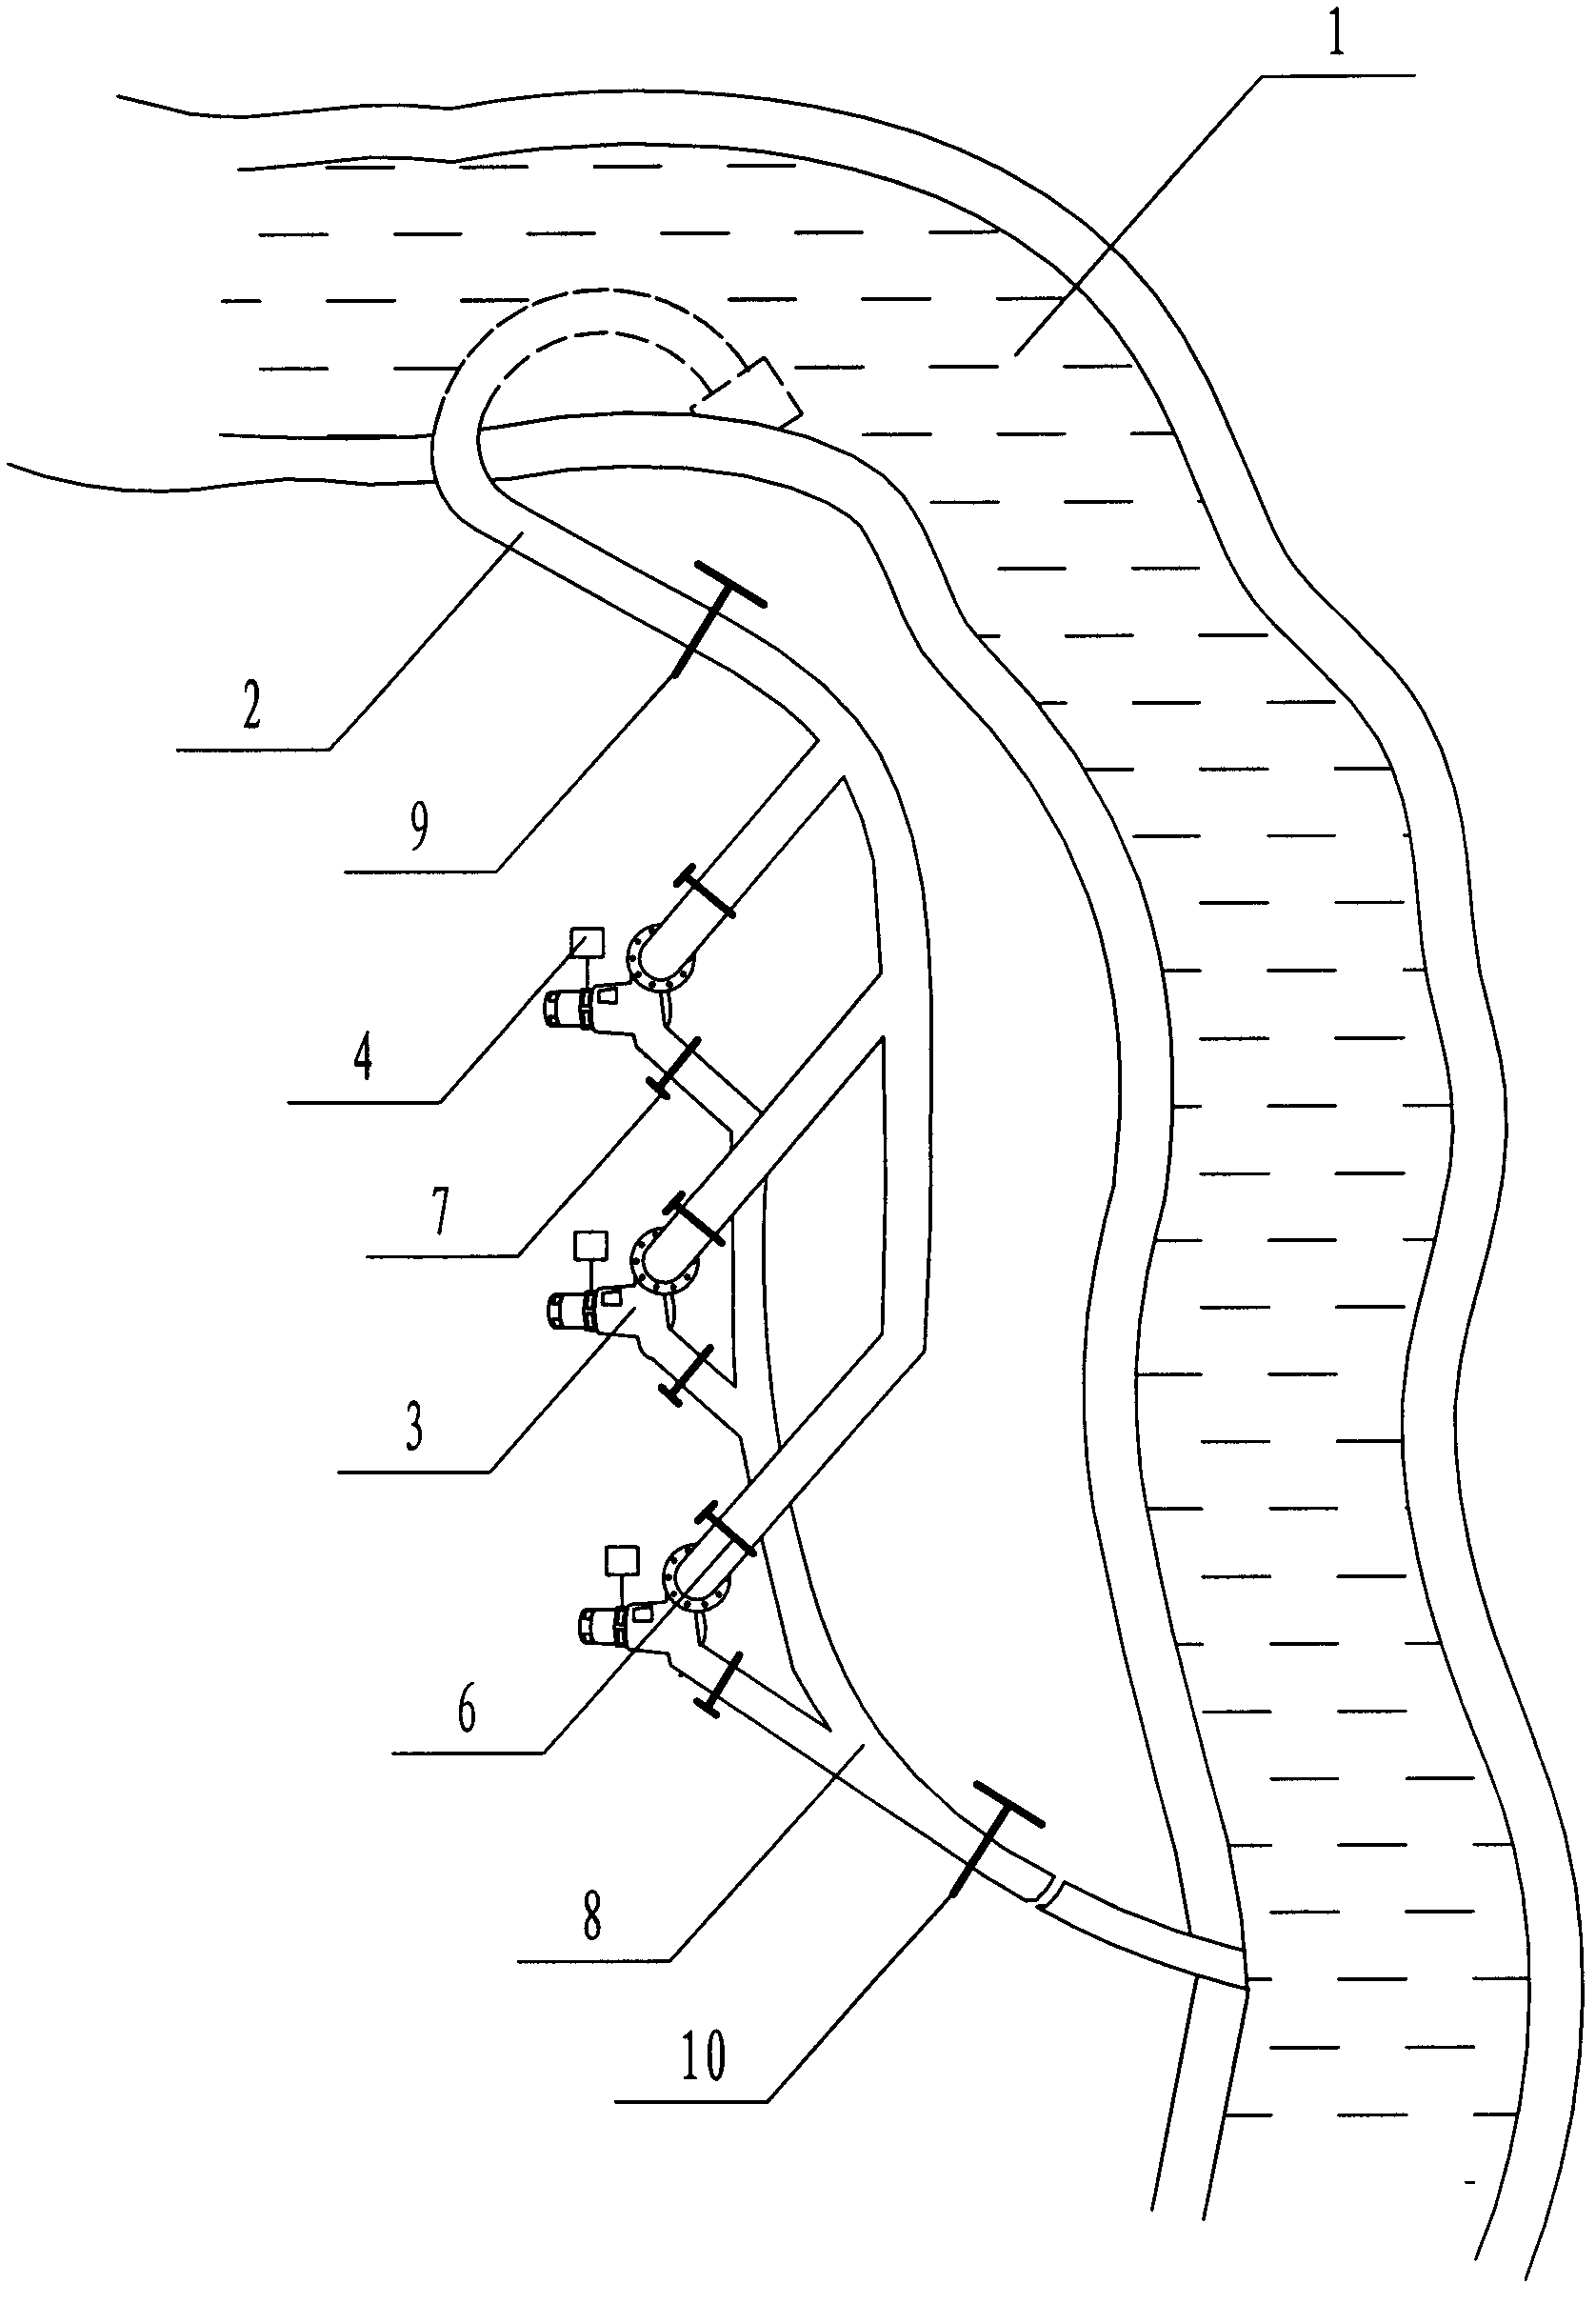 Hydrocone type multi-stage hydroelectric generation method